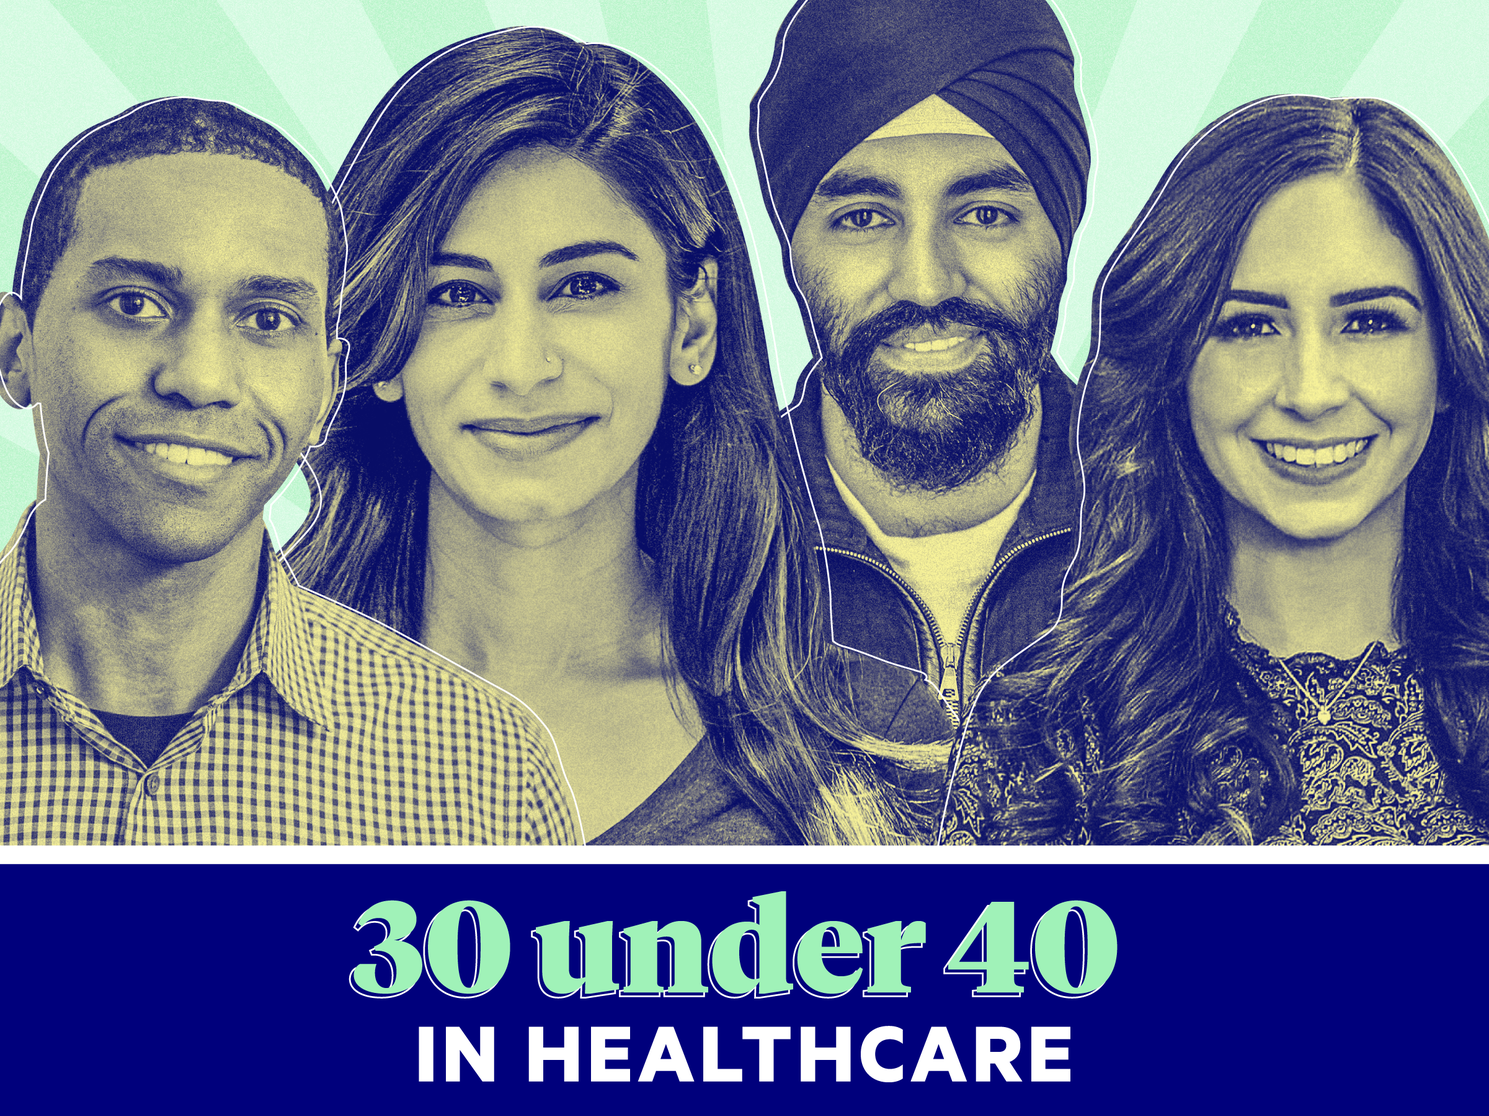 From left: Dr. Isaac Kinde, head of research and innovation and a co-founder of Thrive, Dr. Asima Ahmad, Carrot Fertility cofounder and chief medical officer, Harpreet Singh Rai, Oura CEO, and Deena Shakir, Lux Capital partner on a light green background and "30 under 40 in Healthcare" text in the foreground